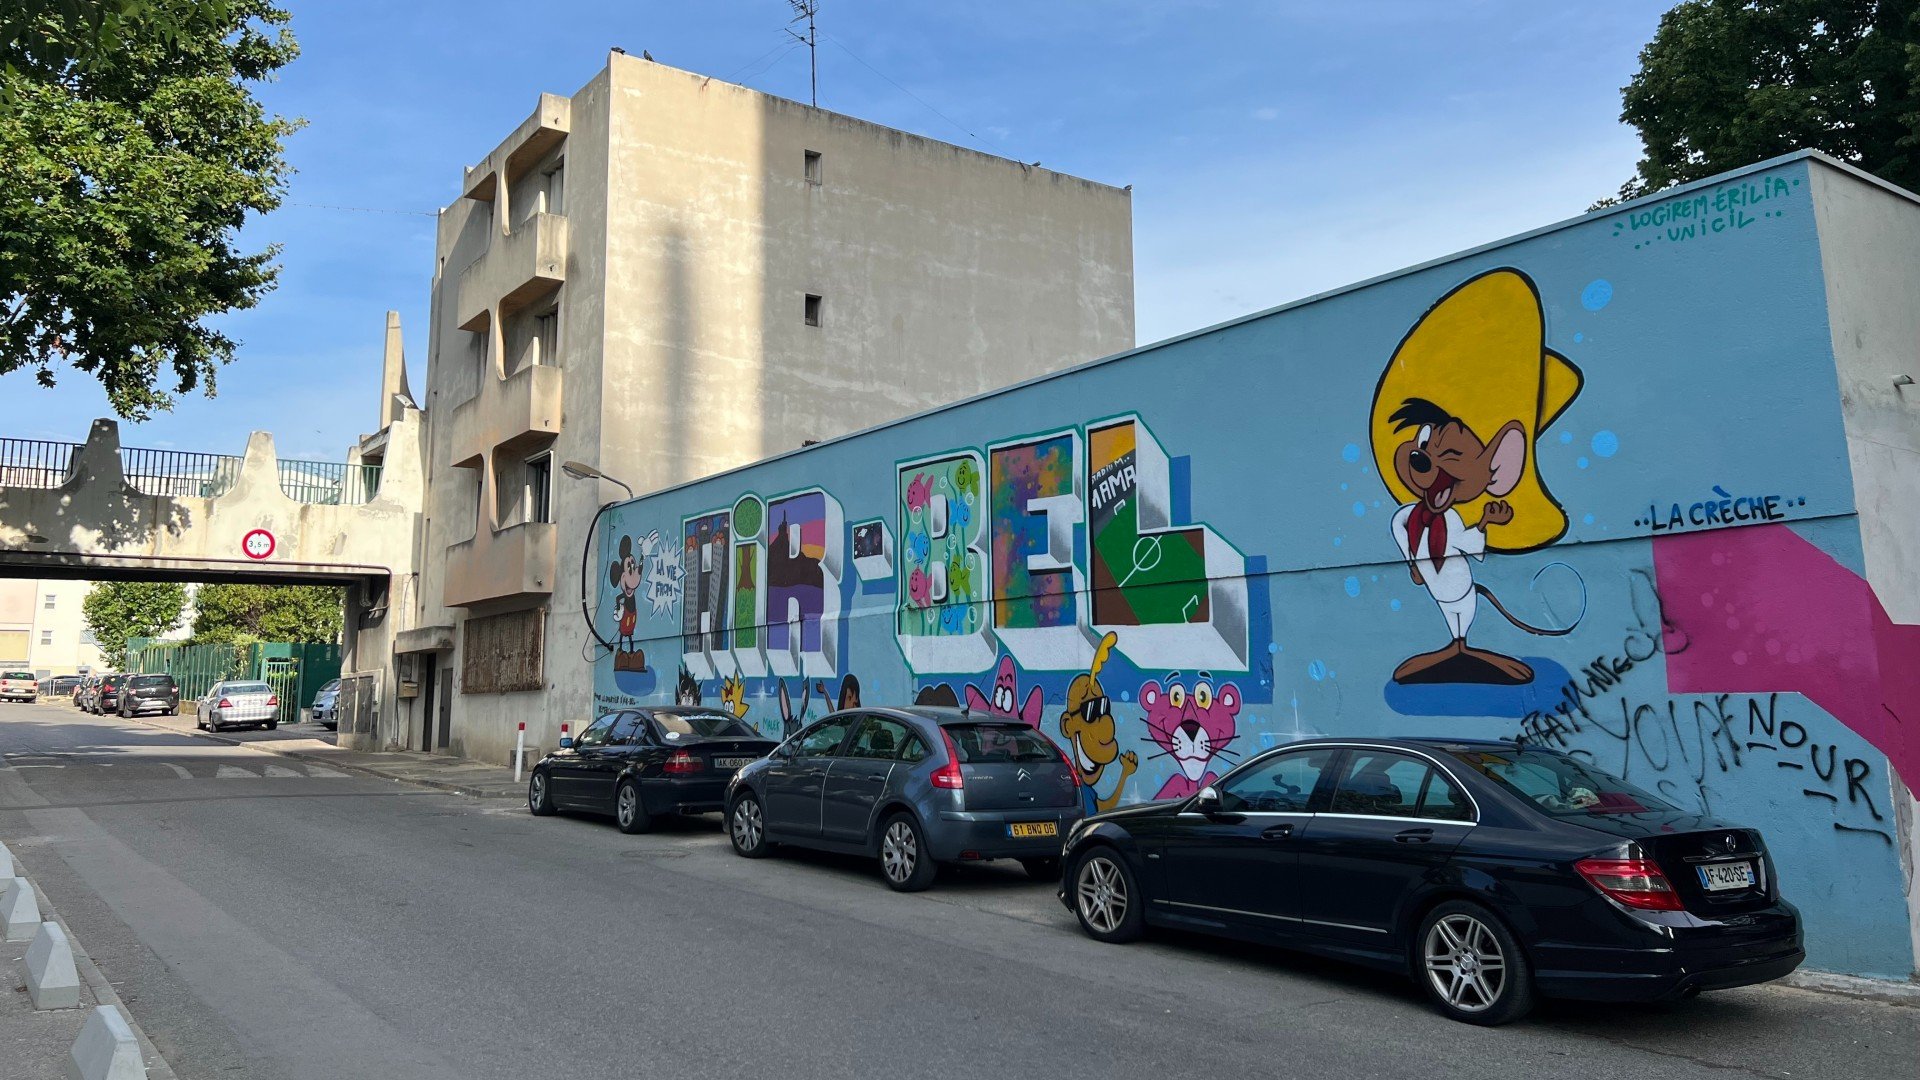 The Air-Bel estate in eastern Marseille, one of the city's poorest areas, was discovered to have Legionella in its water in 2017. Six years on, the problem hasn't been resolved (MEE/Frank Andrews)